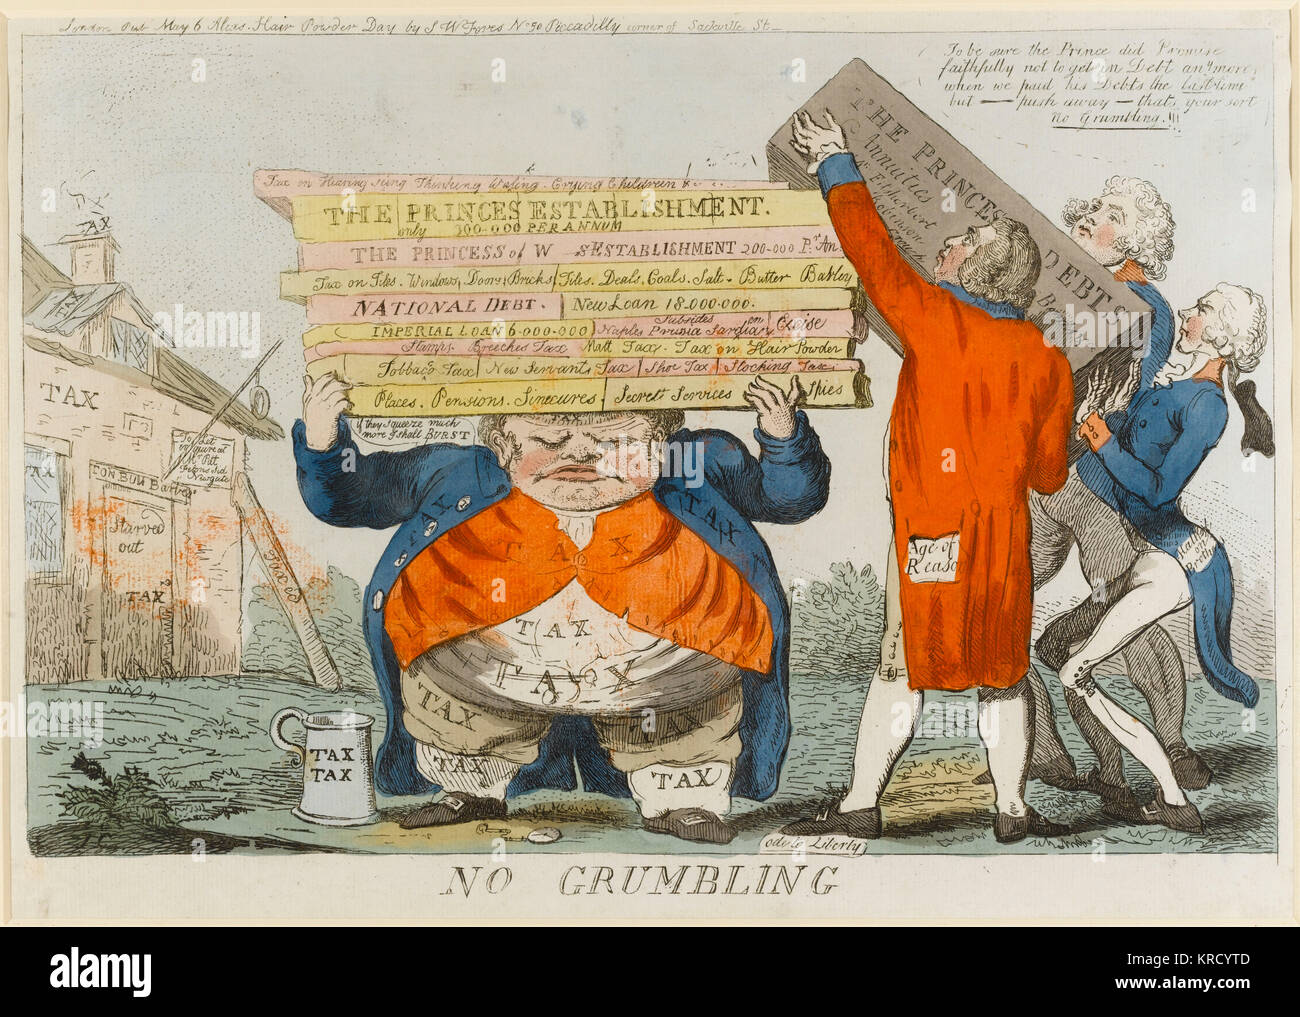 Satirical cartoon, No Grumbling.  King George III, the Prince of Wales and Pitt heave a huge block labelled 'The Princes debts' on top of a pile of other blocks stacked on the head of John Bull, who is squashed by the load.  Taxes include a 'tax on hearing seeing thinking walking crying children'.     Date: 1795 Stock Photo